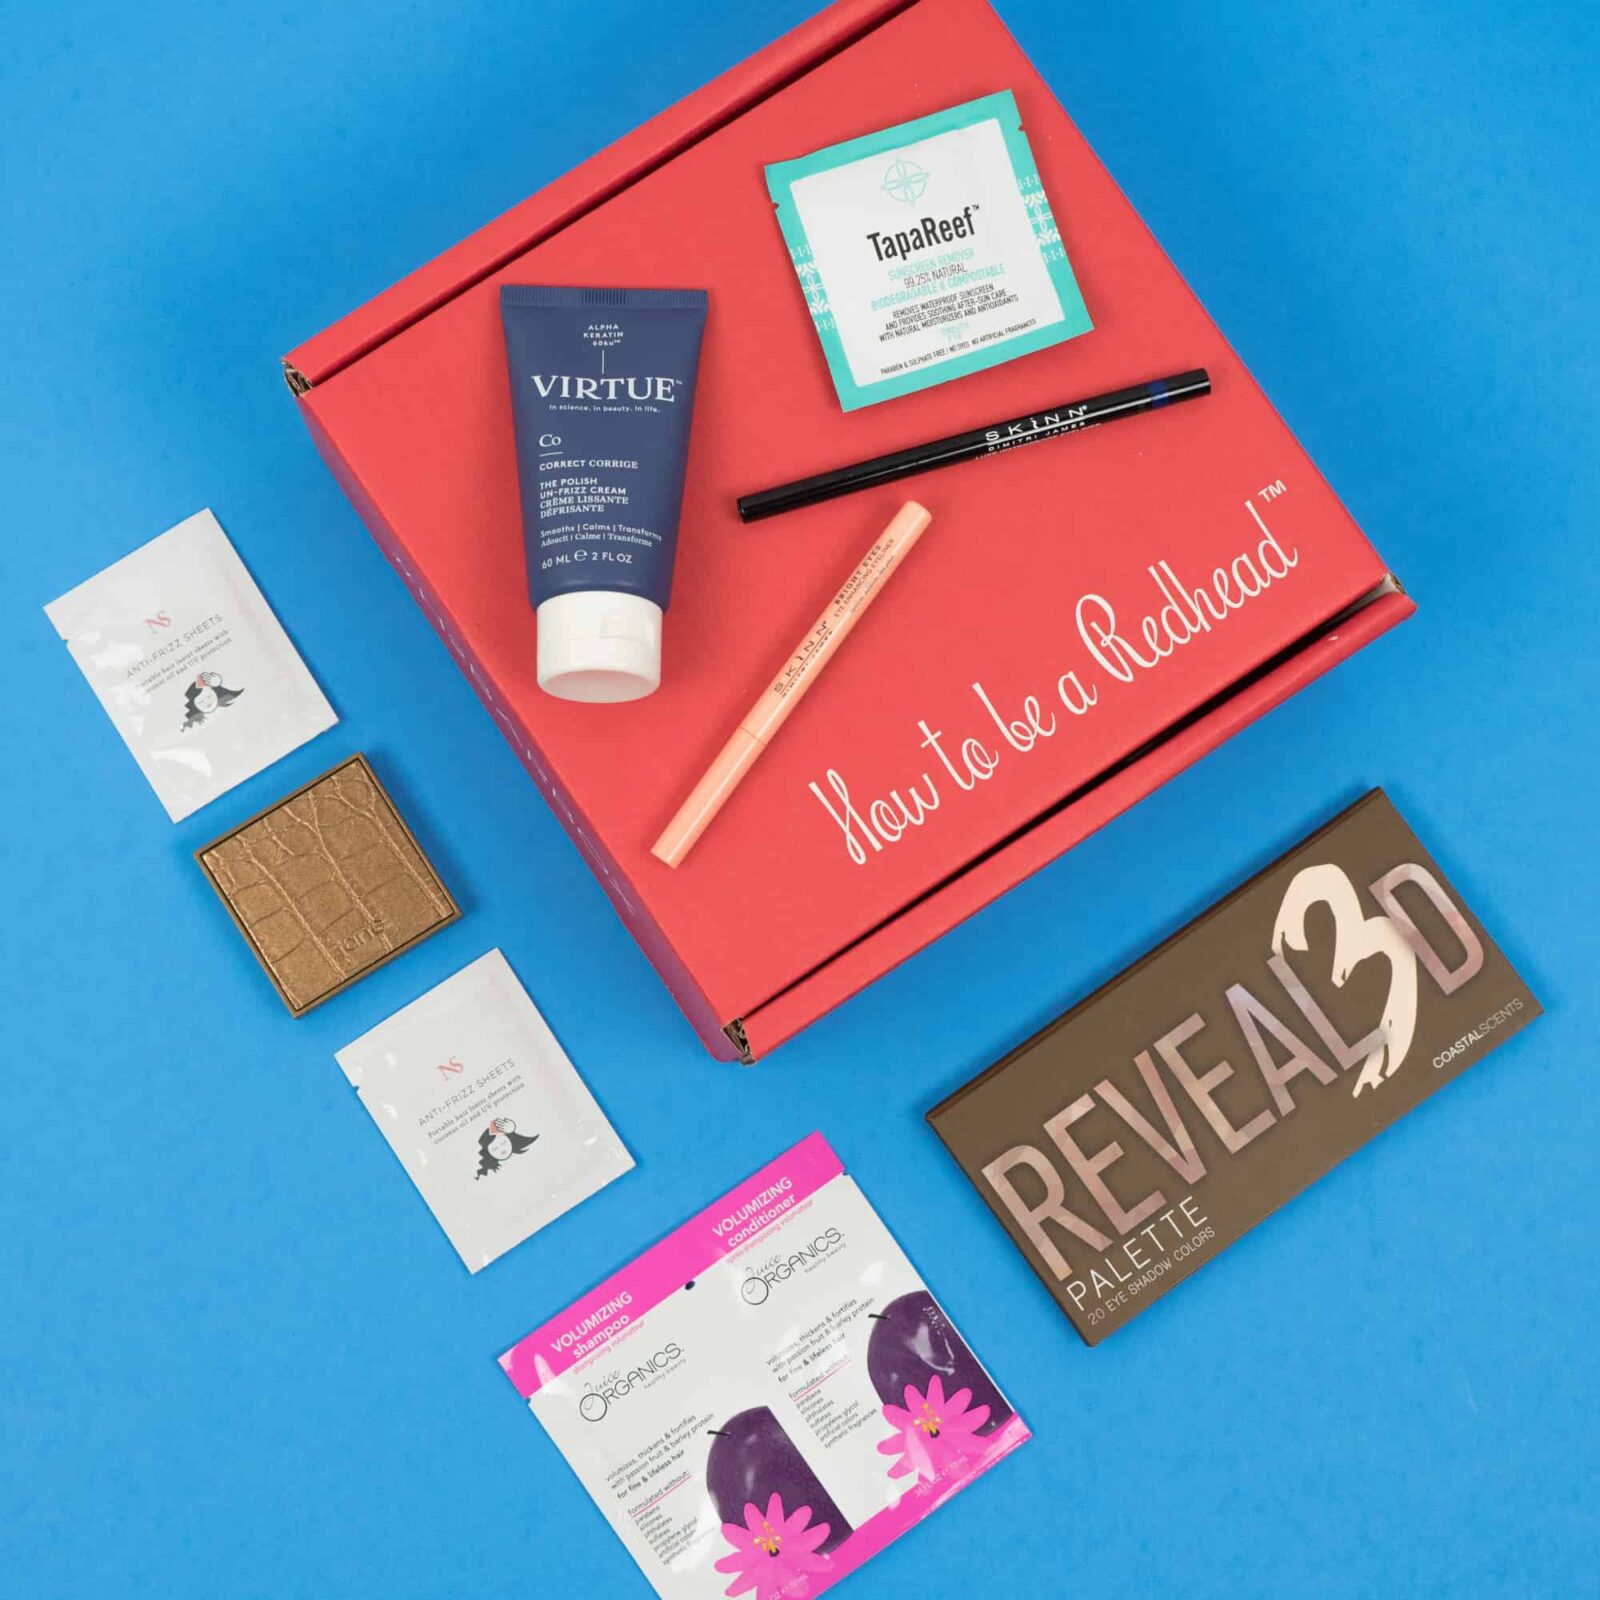 Review: May “Redheads, Let’s Try Something New” H2BAR Box